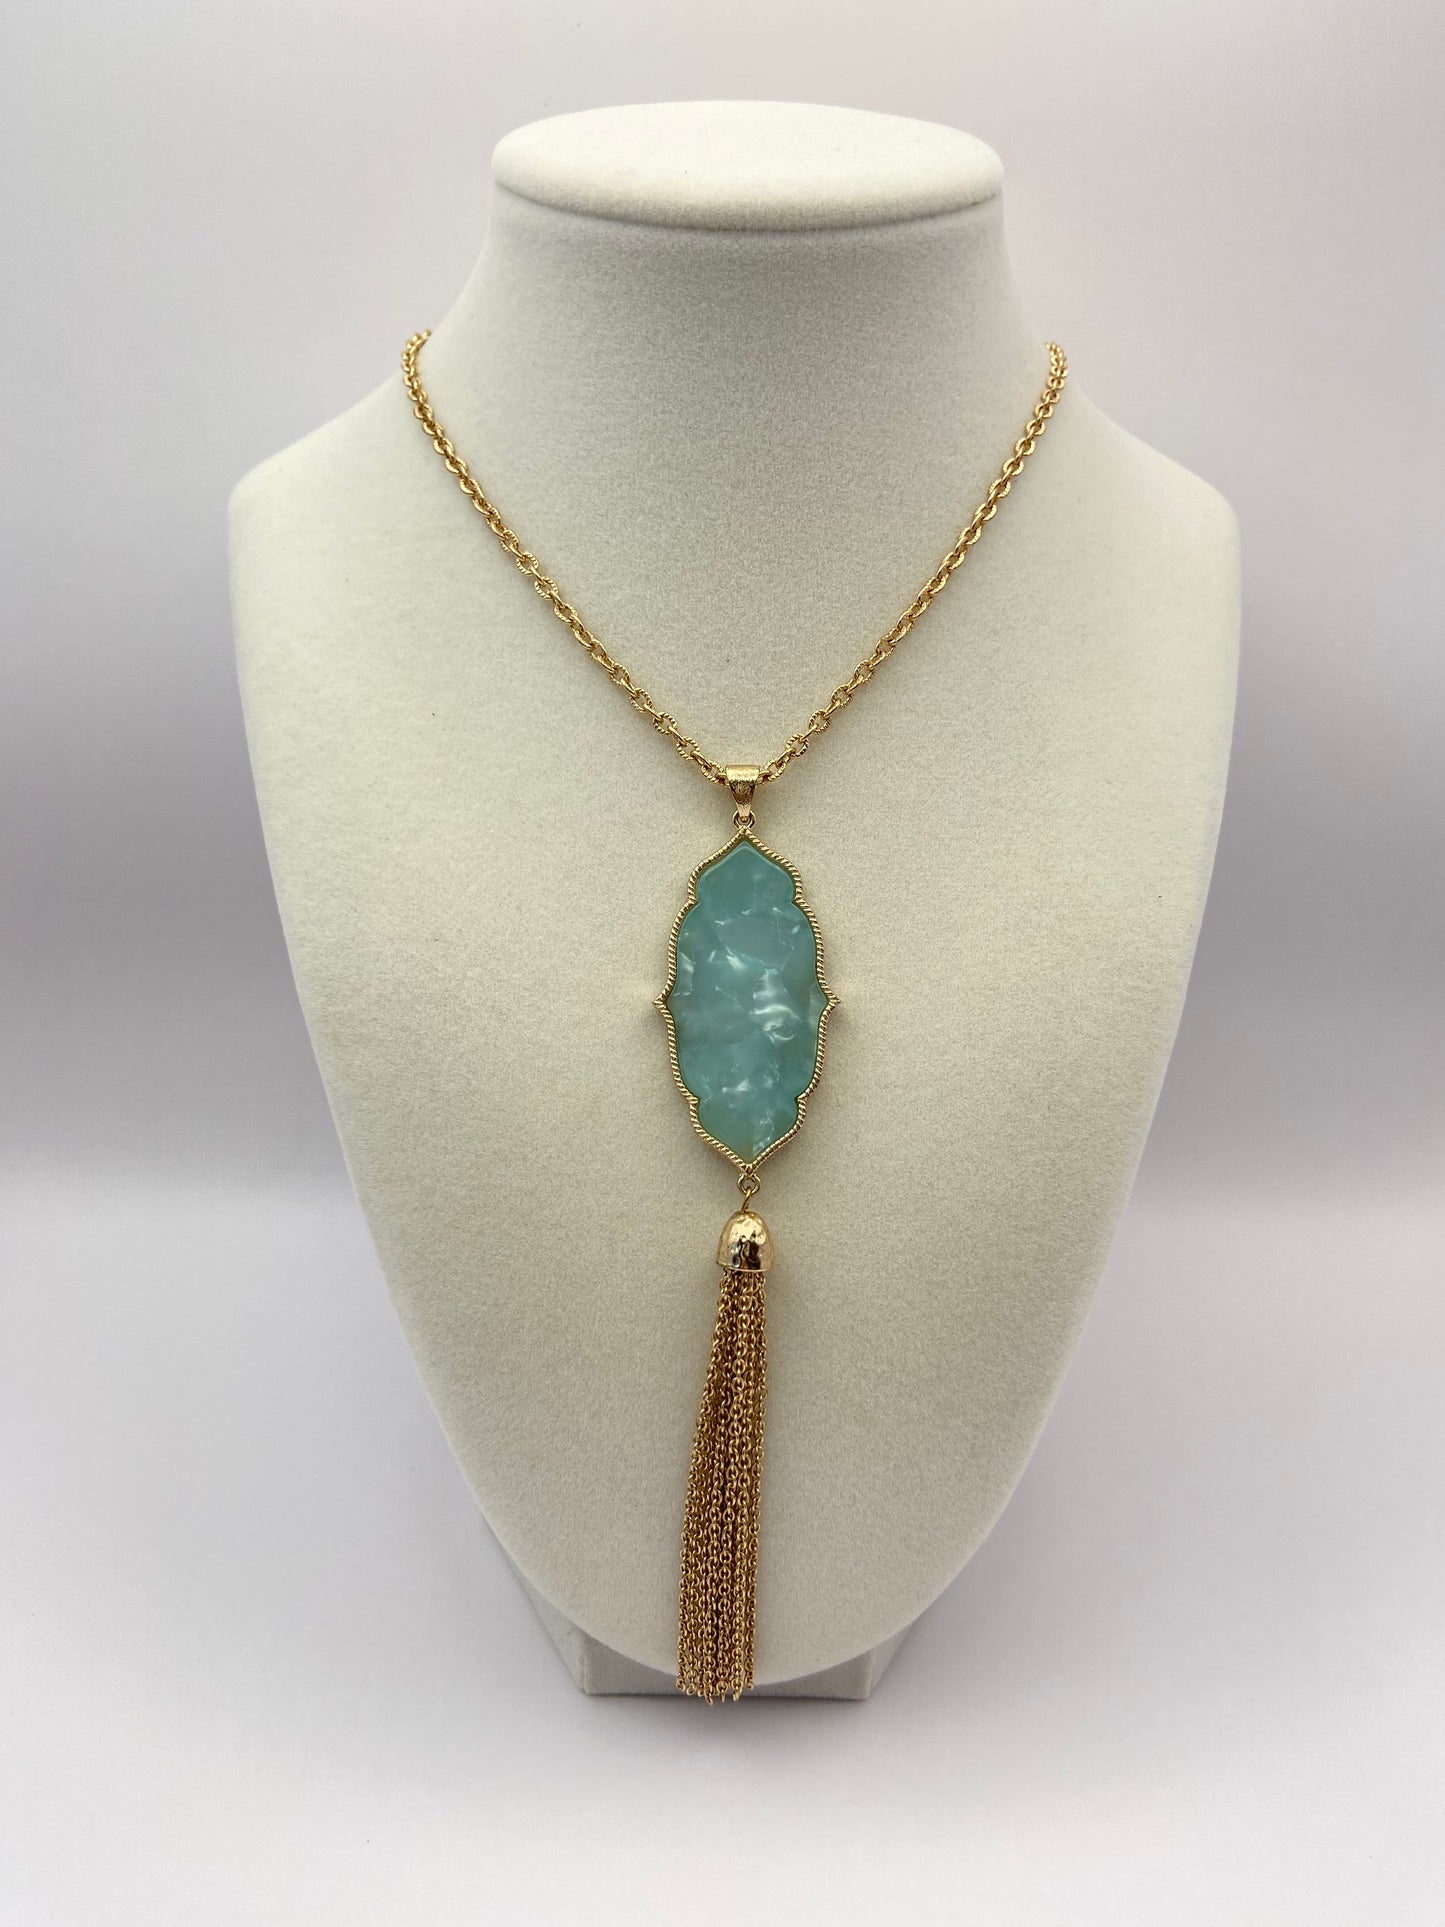 Gold Tone Necklace with Blue Pendant